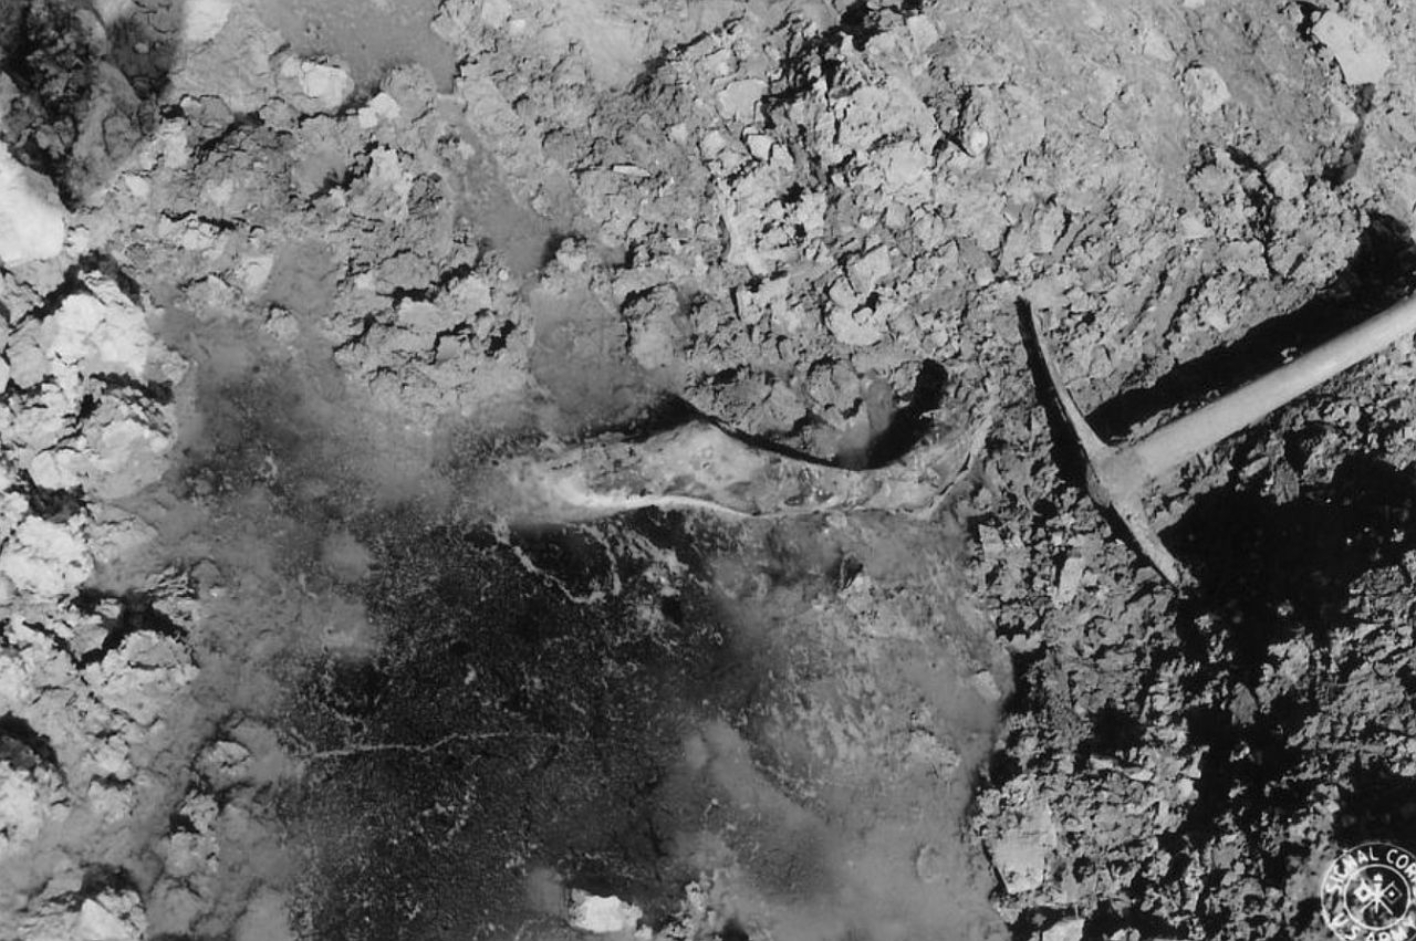 View into one of the mass graves of the Buchenwald subcamp Ohrdruf. A leg sticks out of a muddy hole.